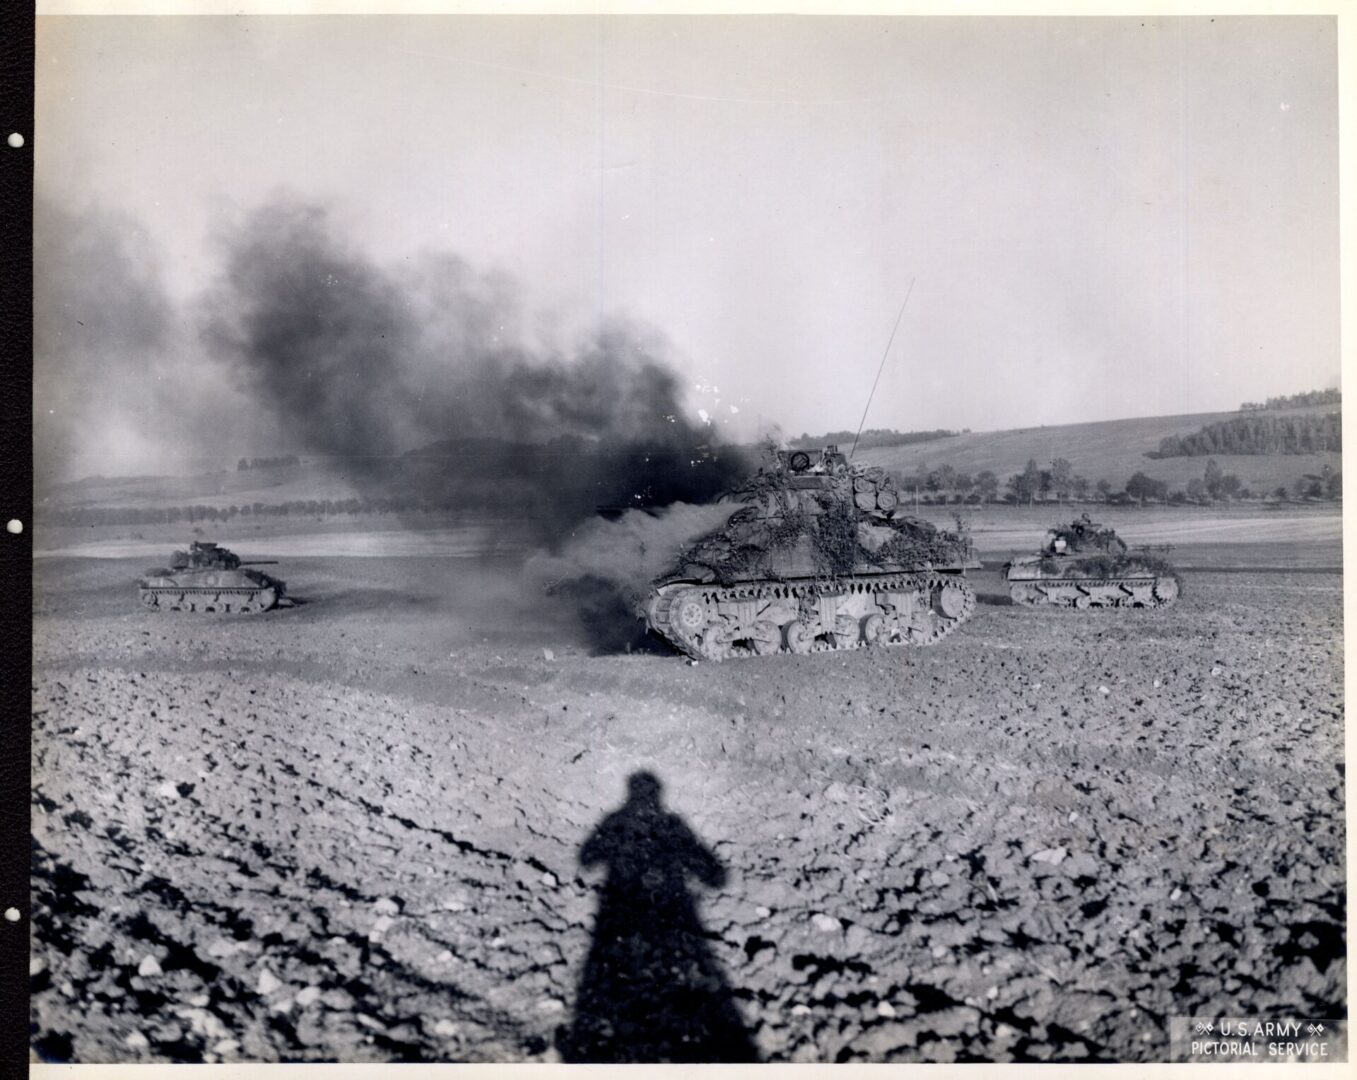 An American tank destroyed by the Germans